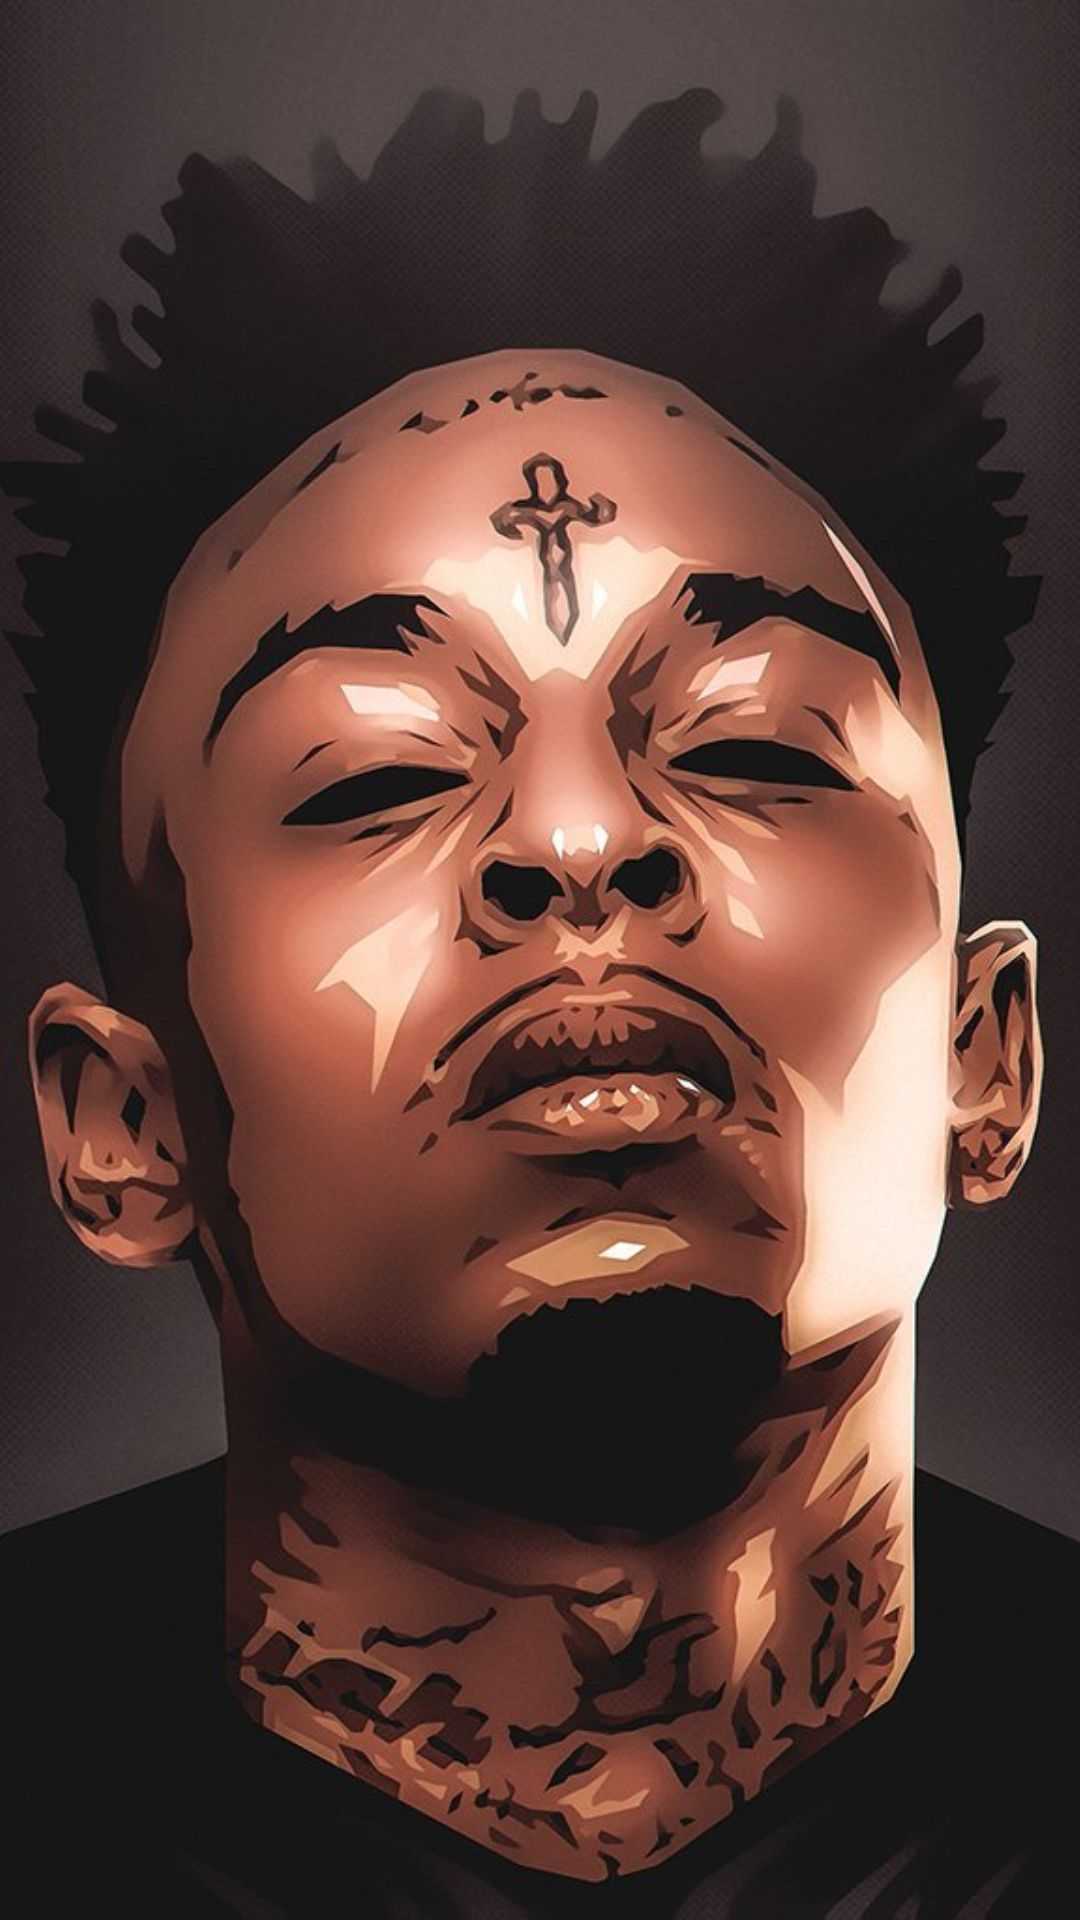 Mobile wallpaper: Music, 21 Savage, 1355581 download the picture